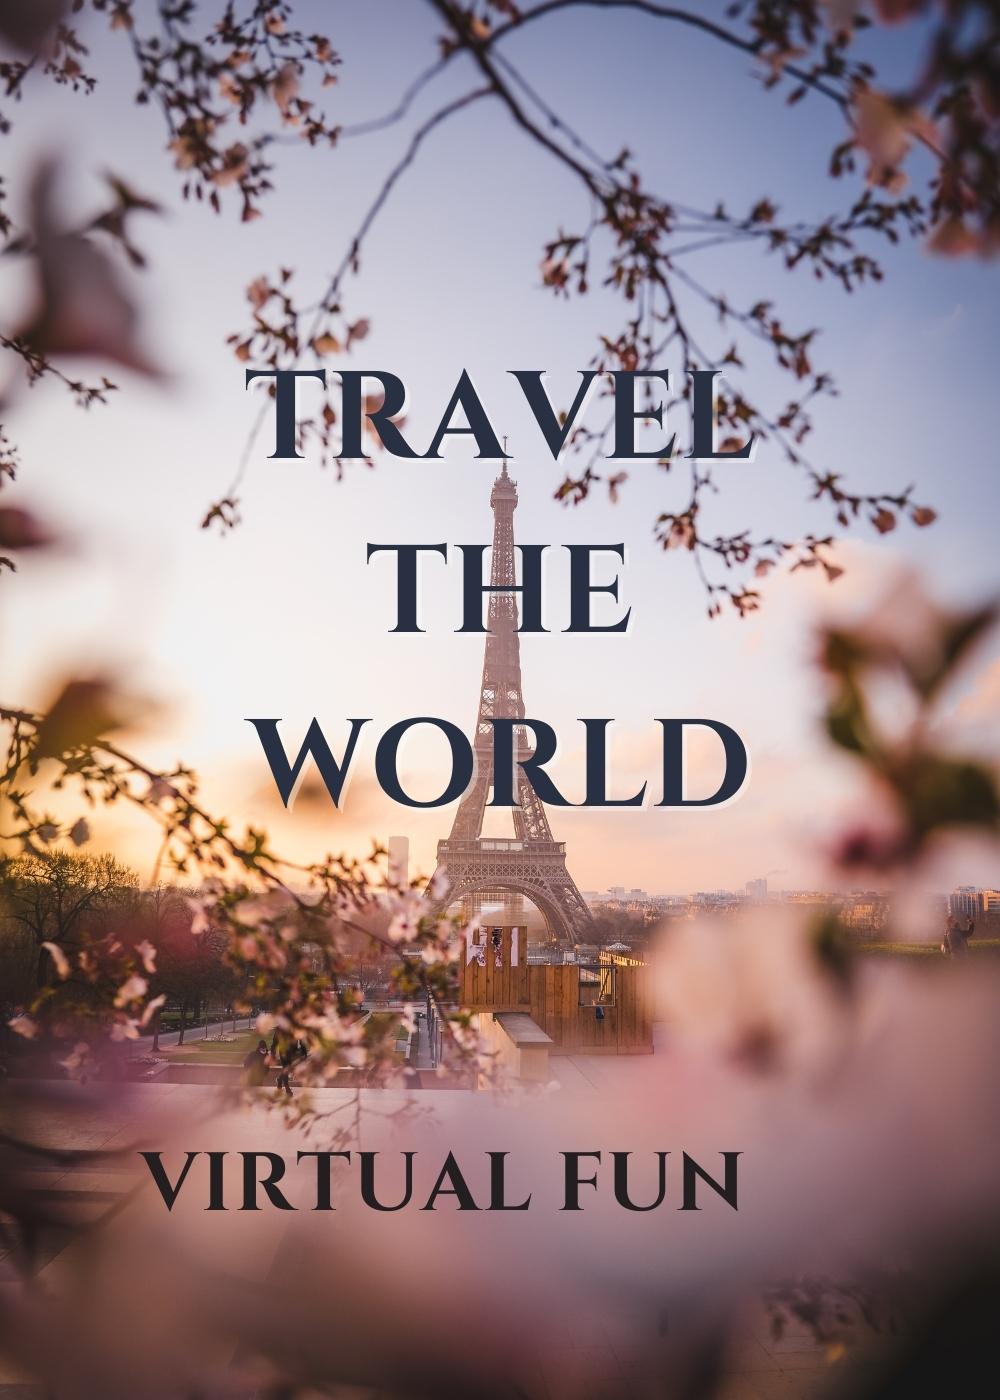 the best virtual travel experiences the best online experiences travel the world without leaving your house